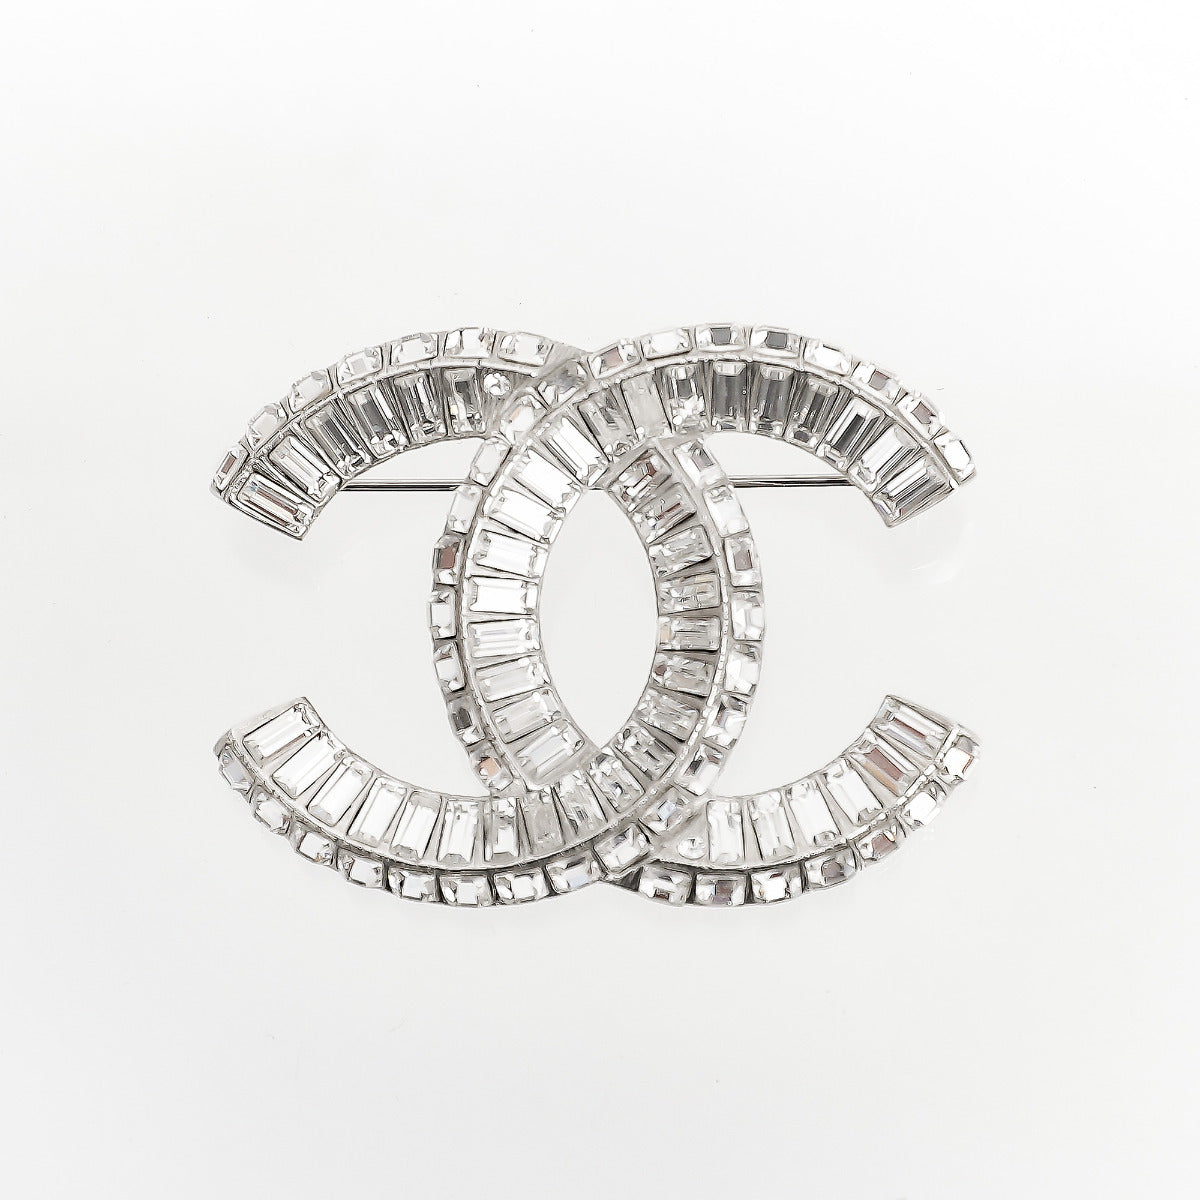 Chanel Silver Crystal Baguette CC Brooch